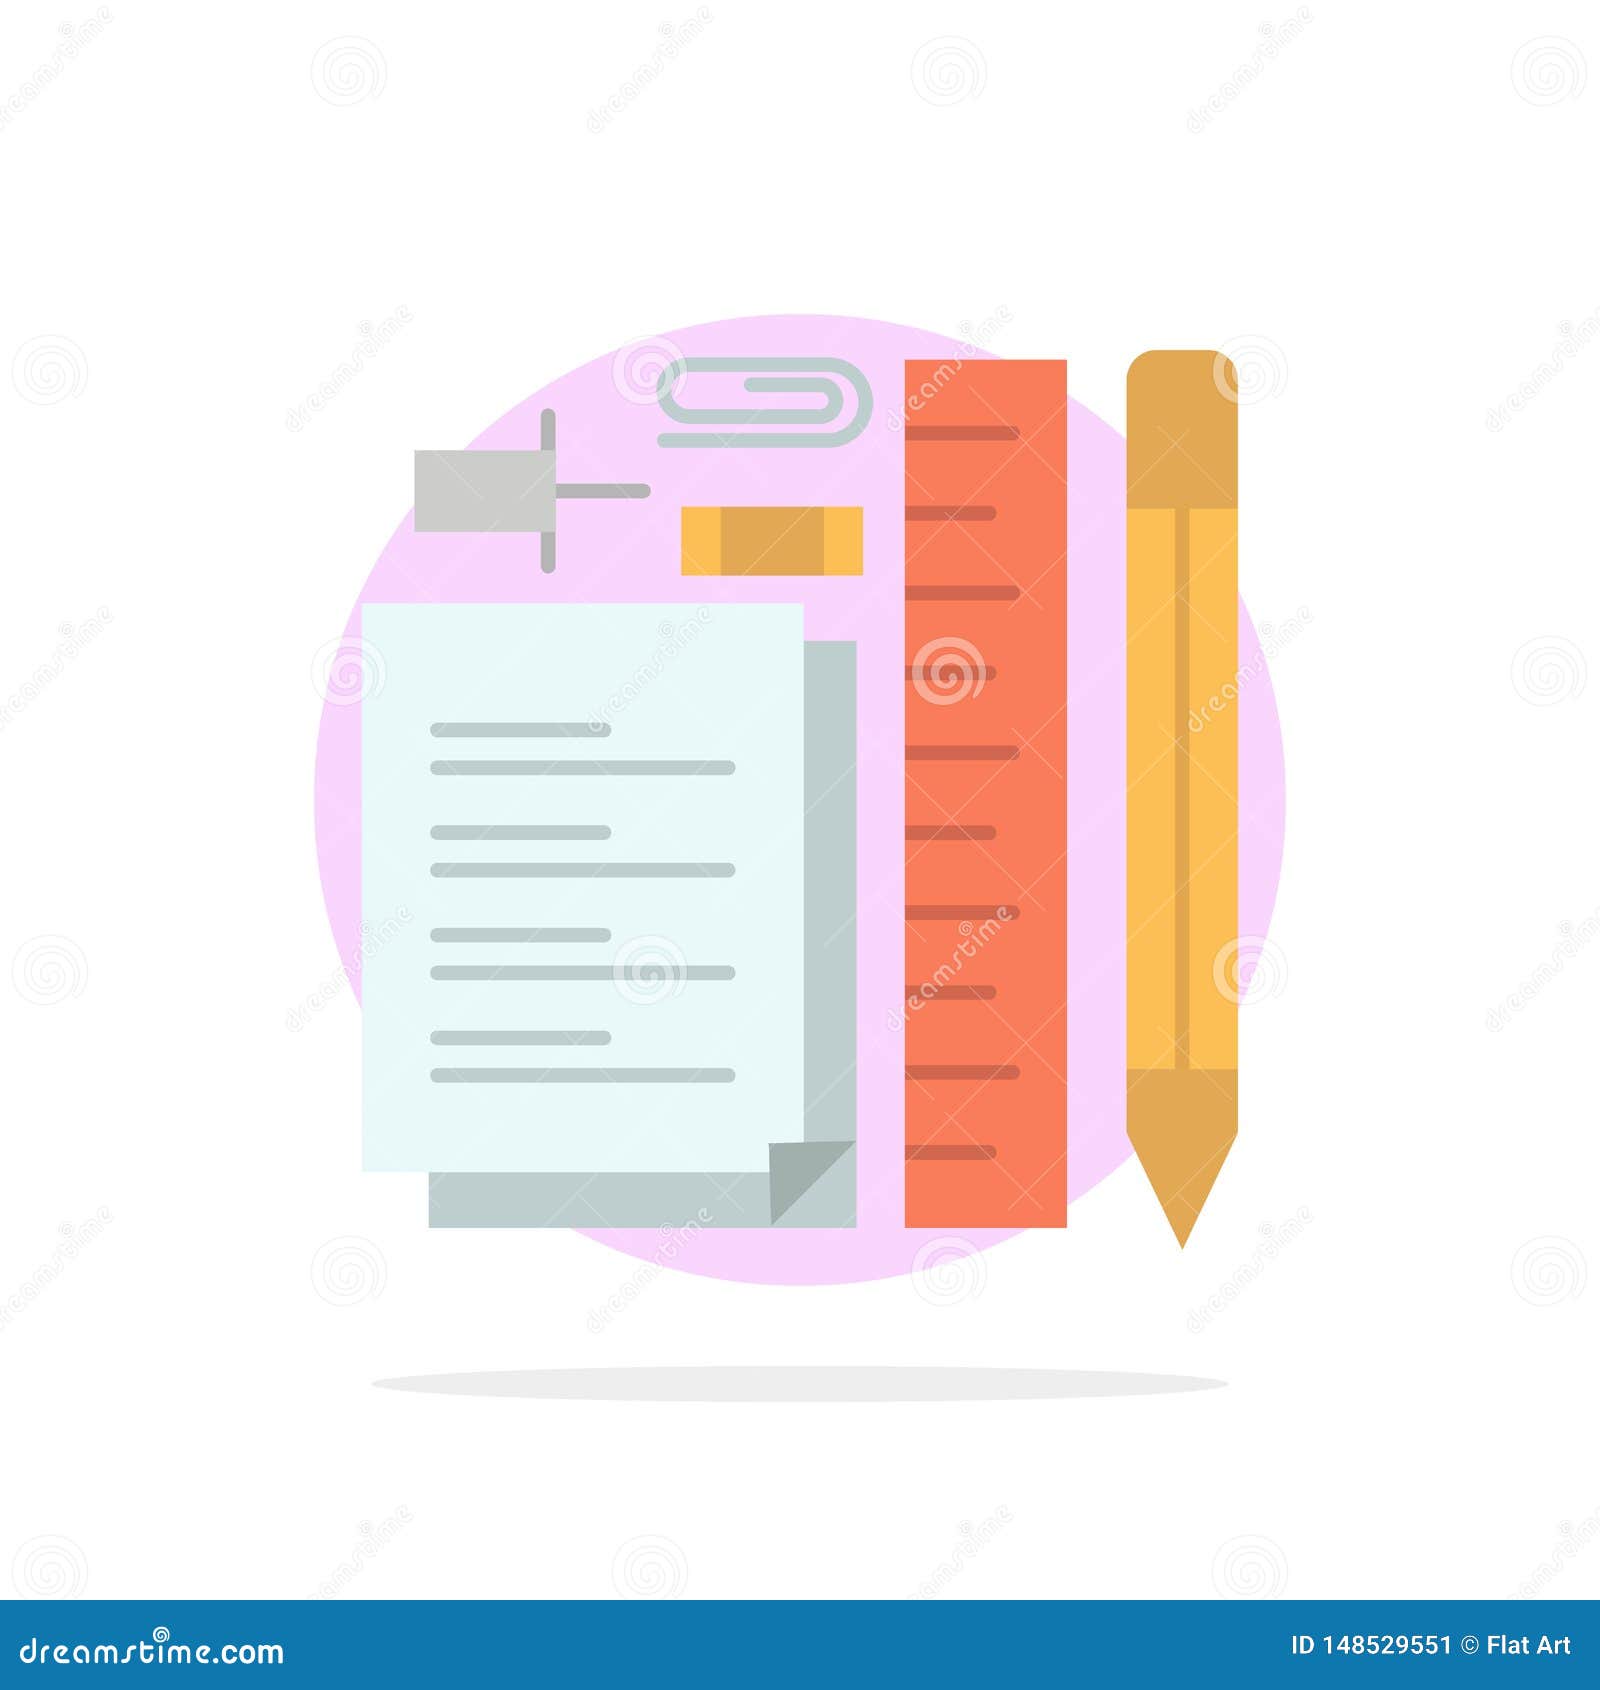 stationary, pencil, pen, notepad, pin abstract circle background flat color icon